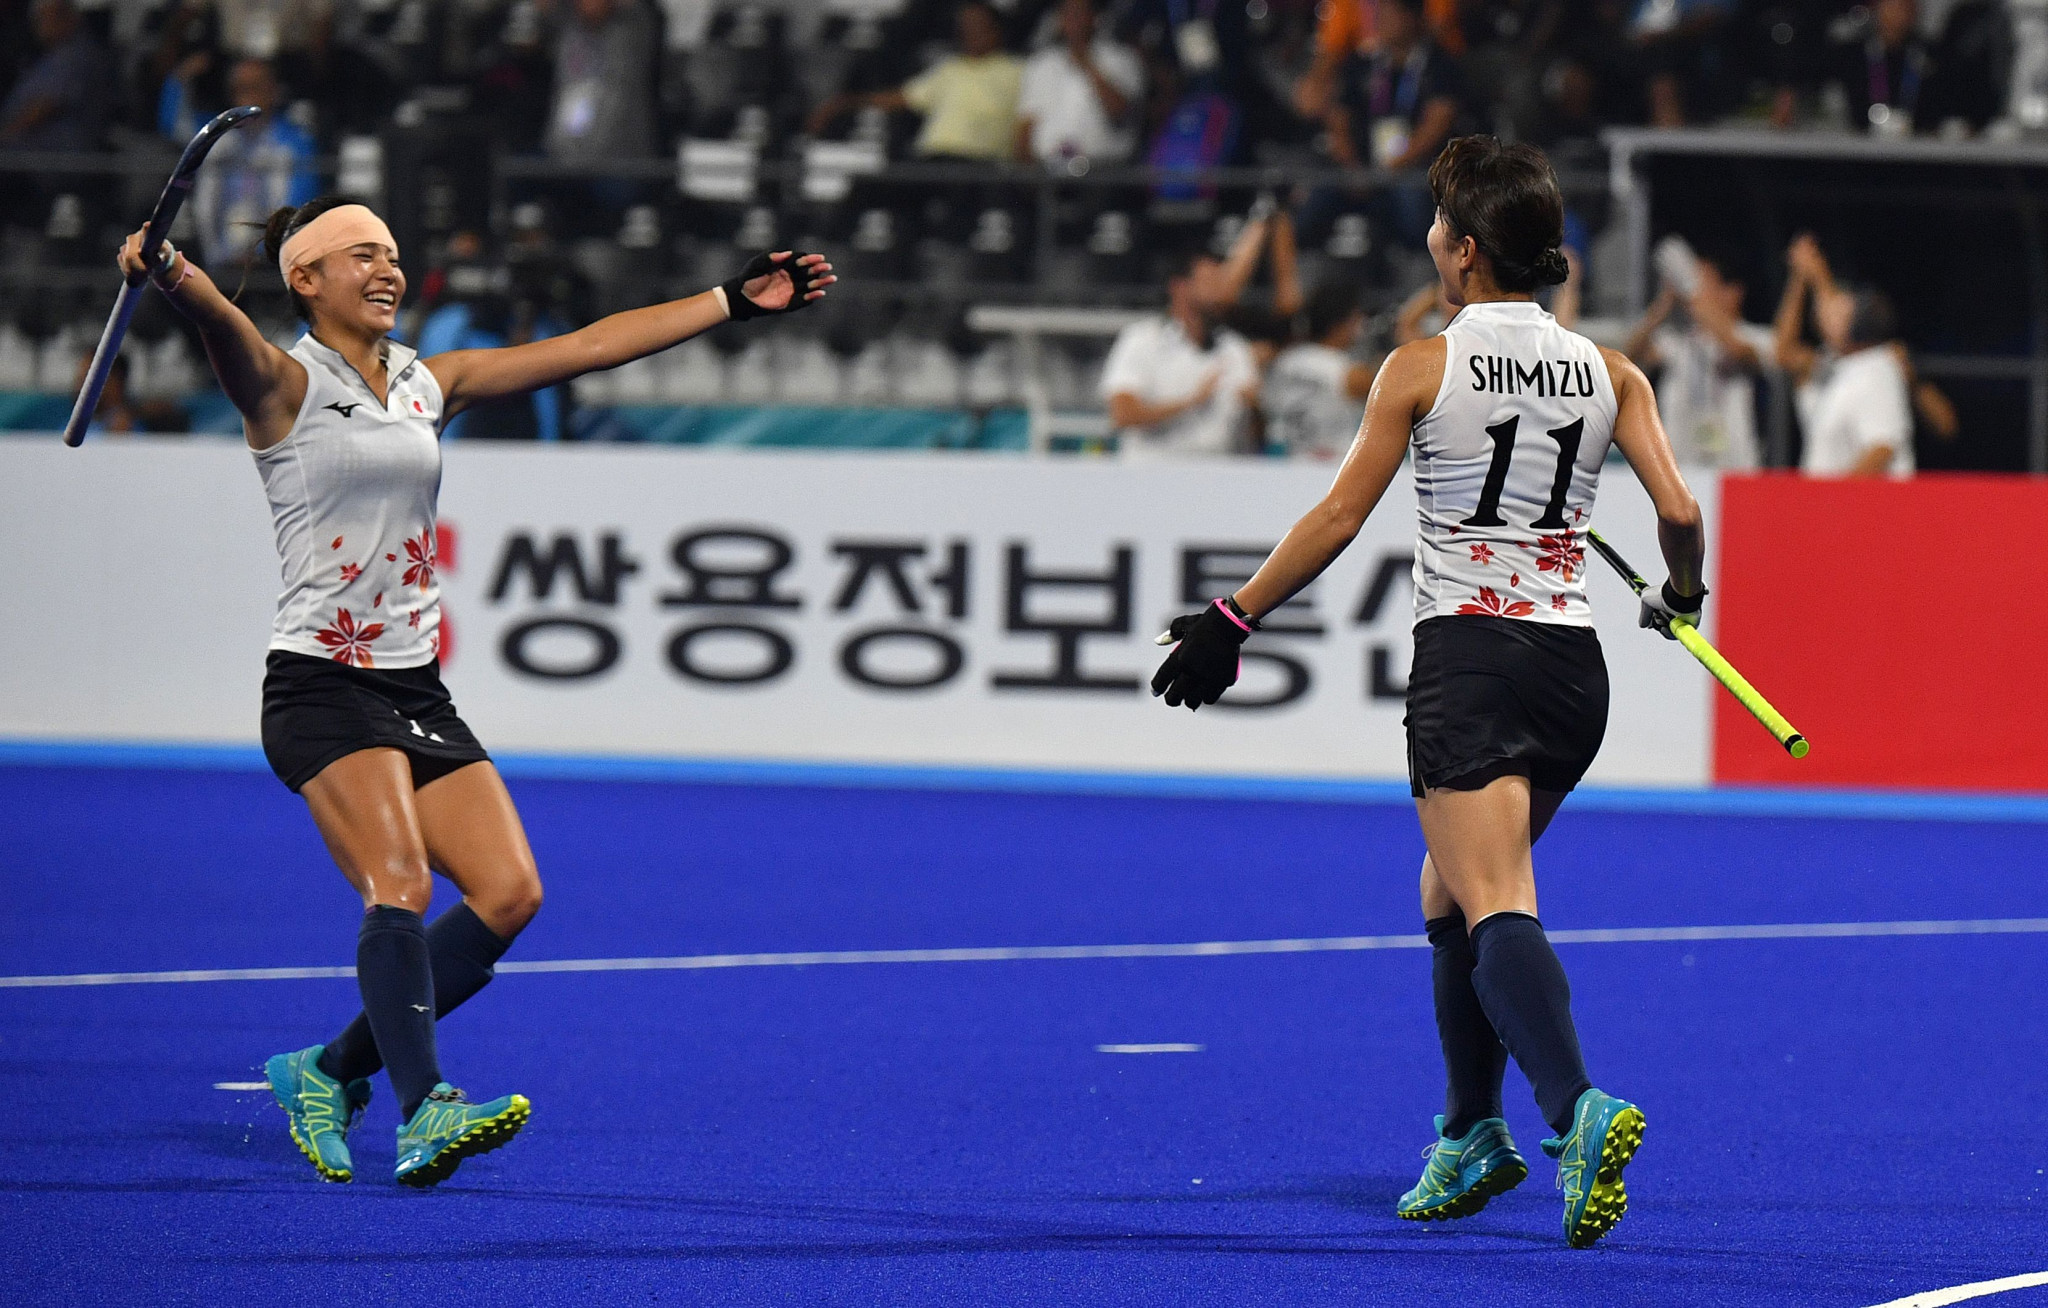 Japan won all three matches in Pool A ©Getty Images